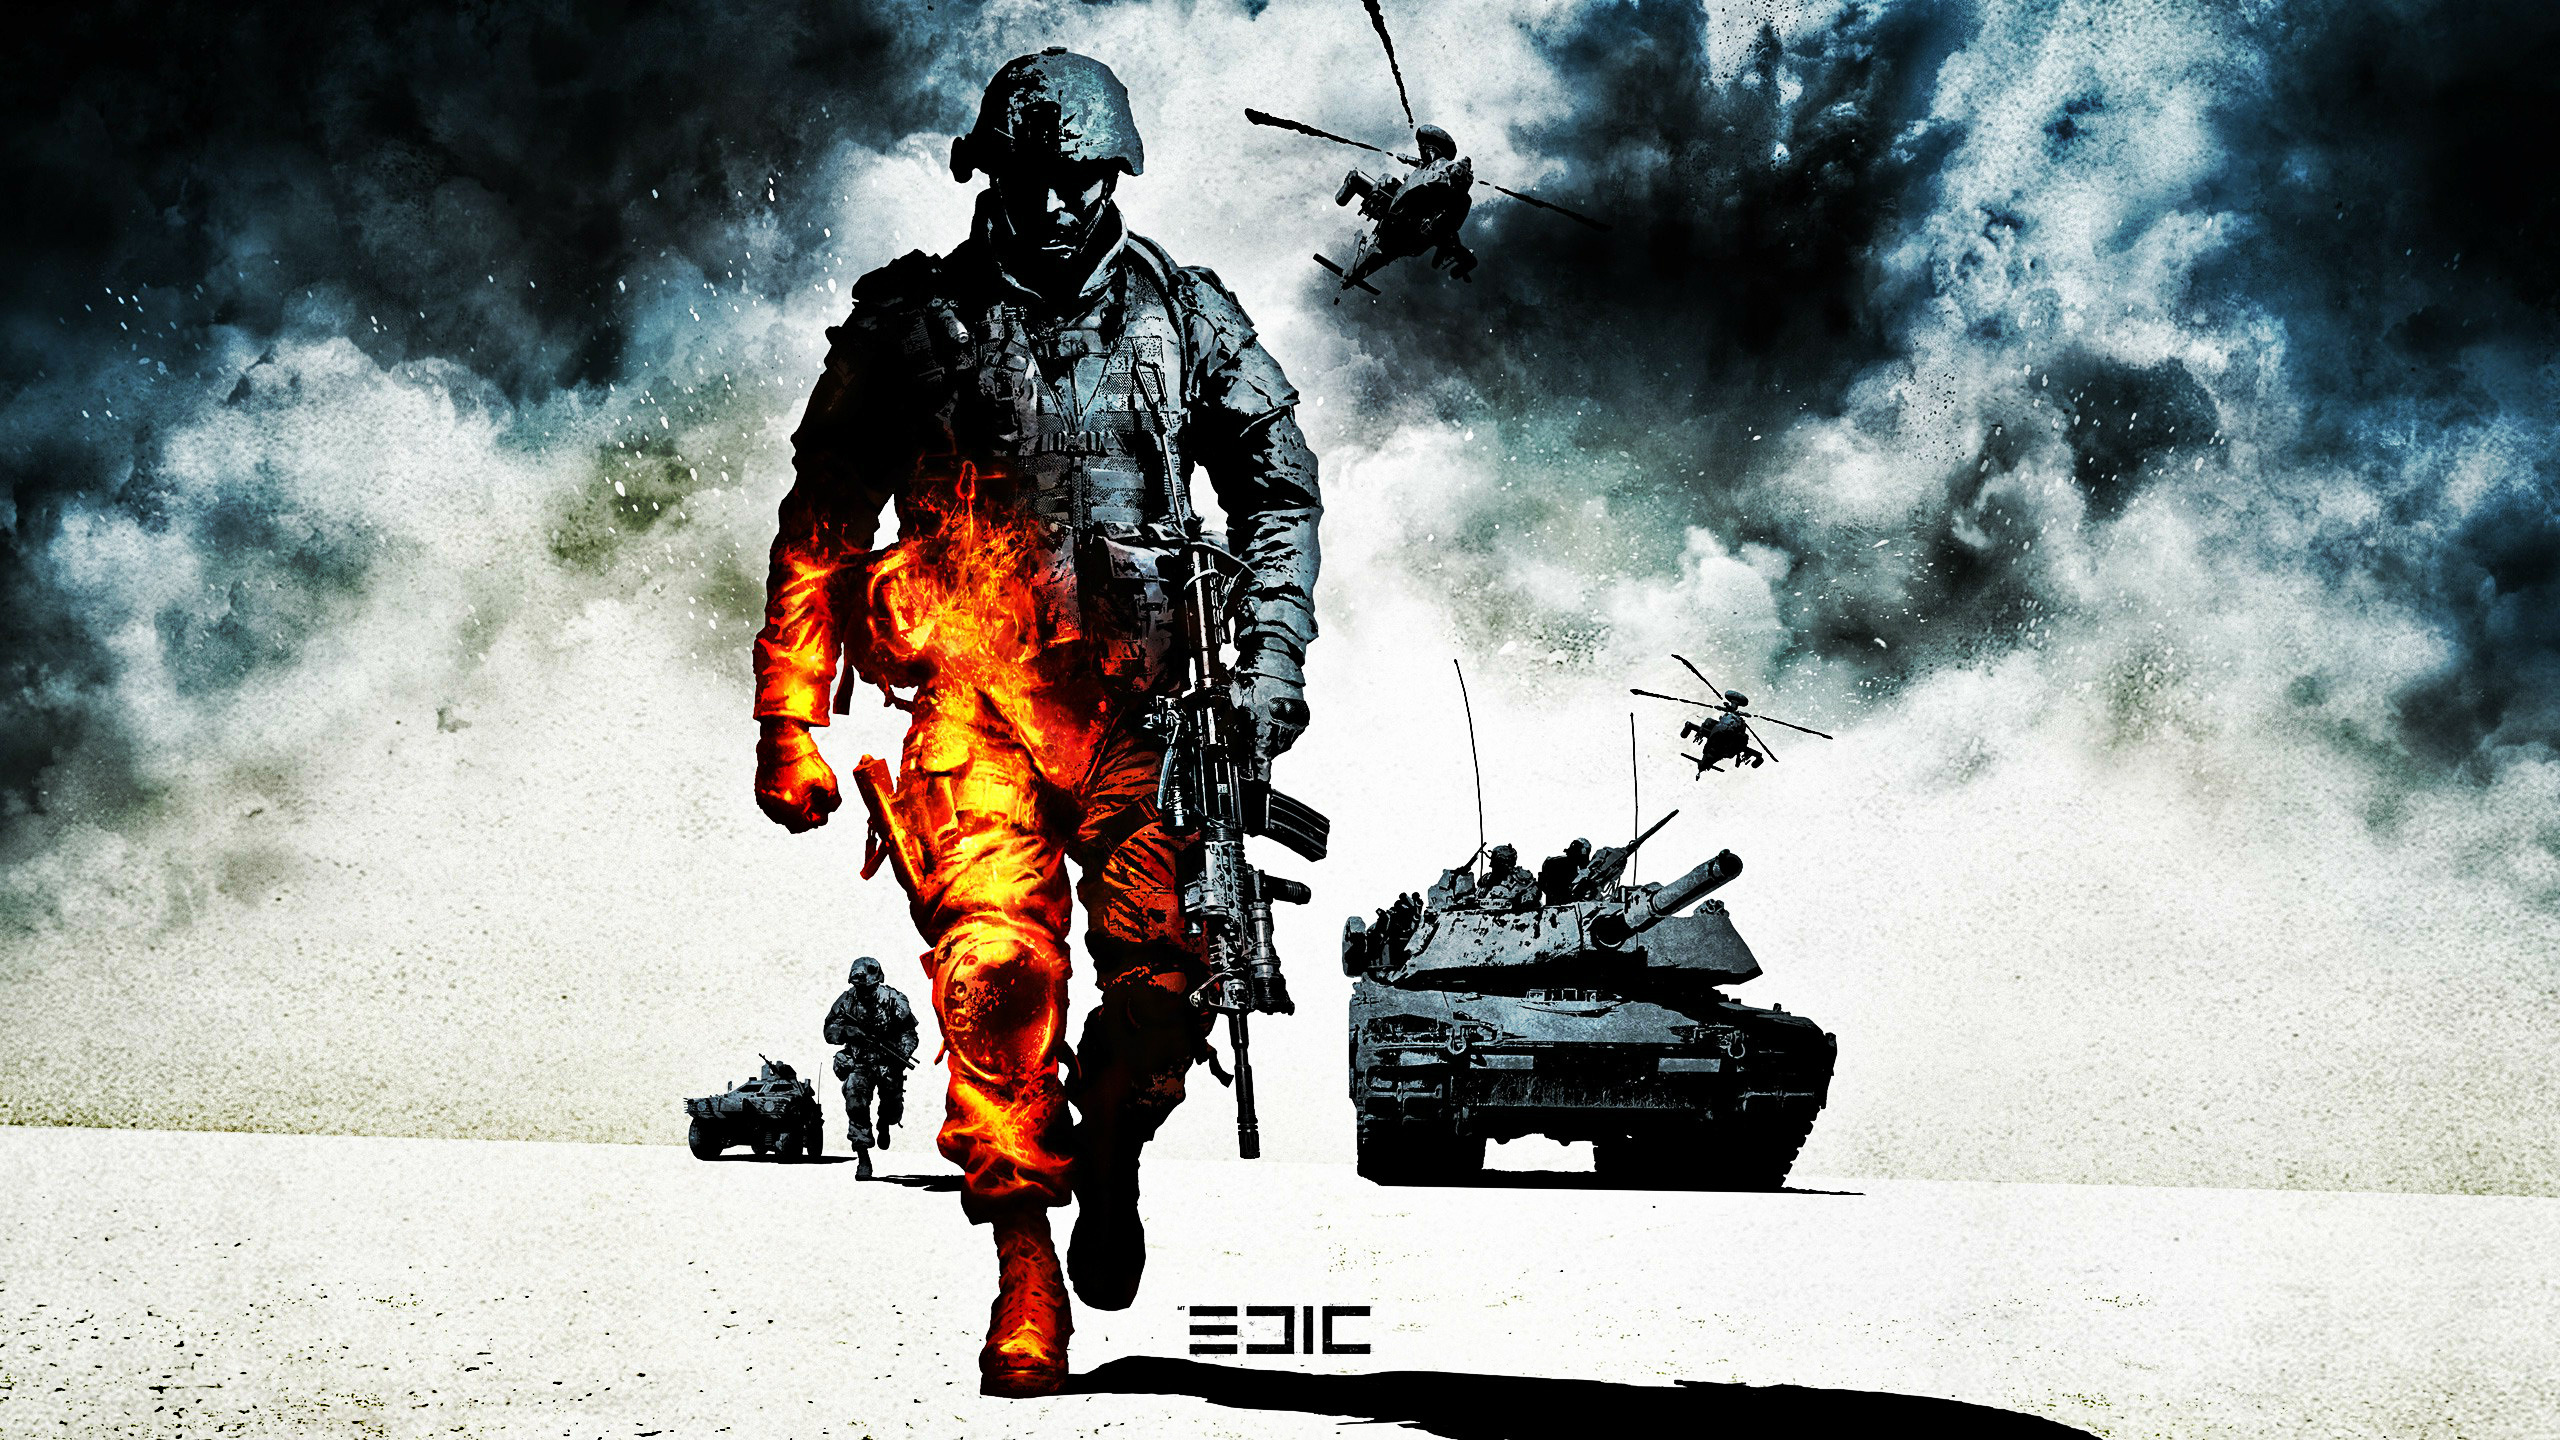 wallpaper games 1080p,soldier,explosion,army,marines,vehicle